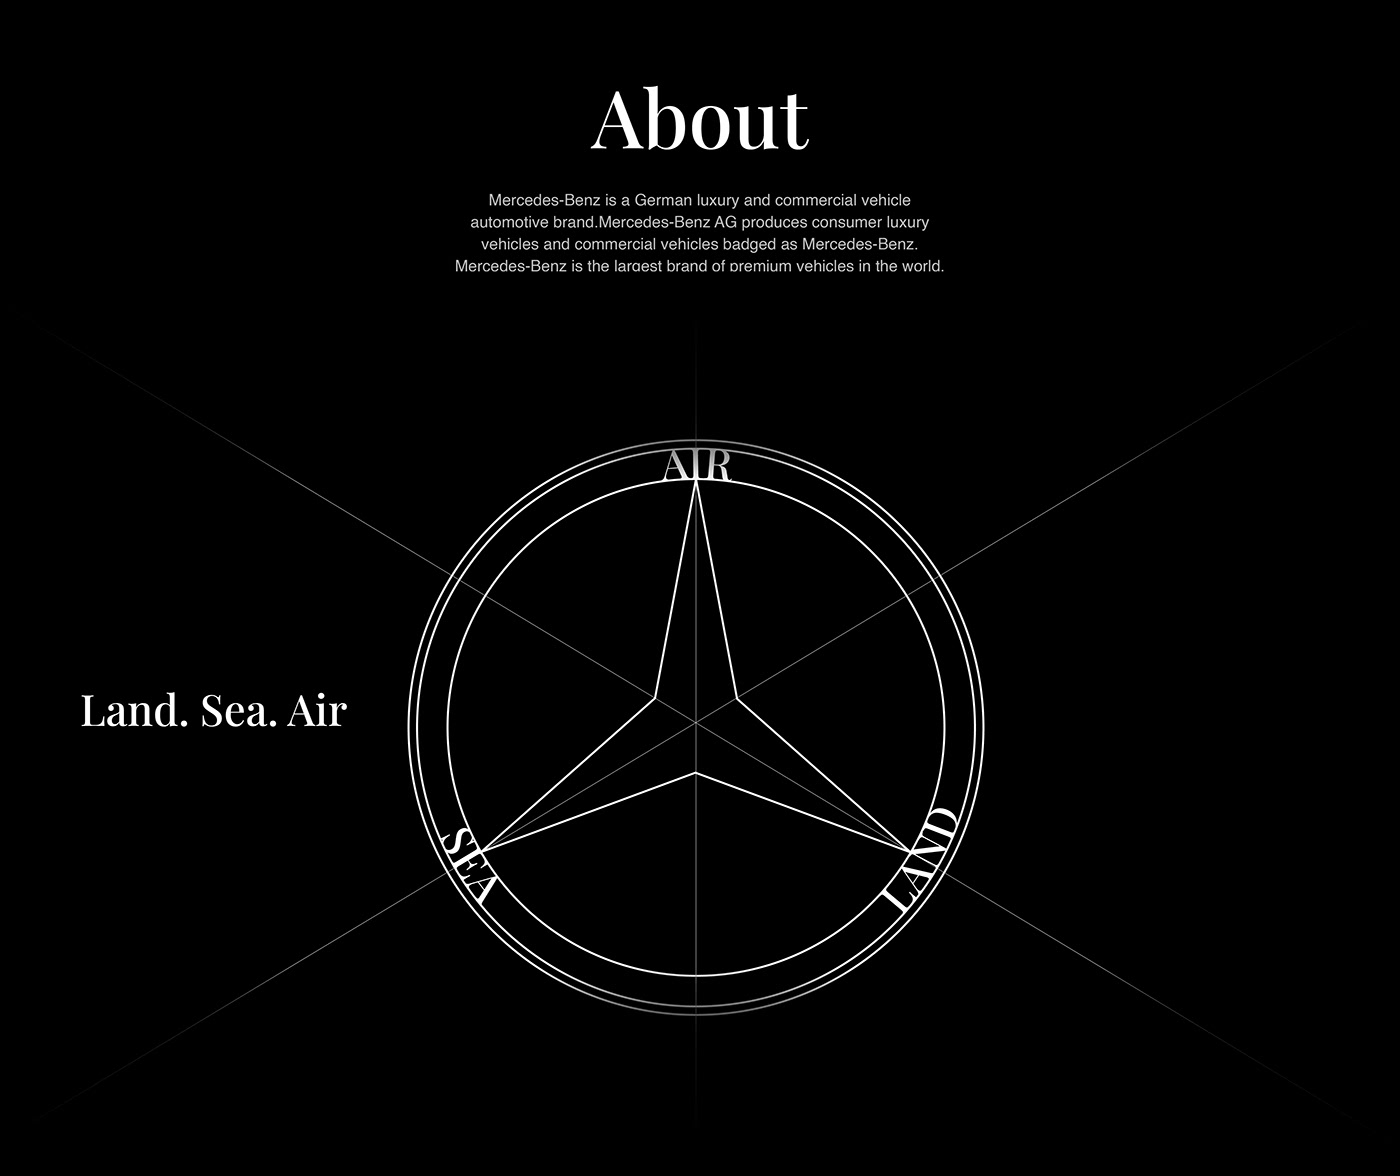 automobile car concept Interface mobile mercedes ux/ui Website user interface user experience